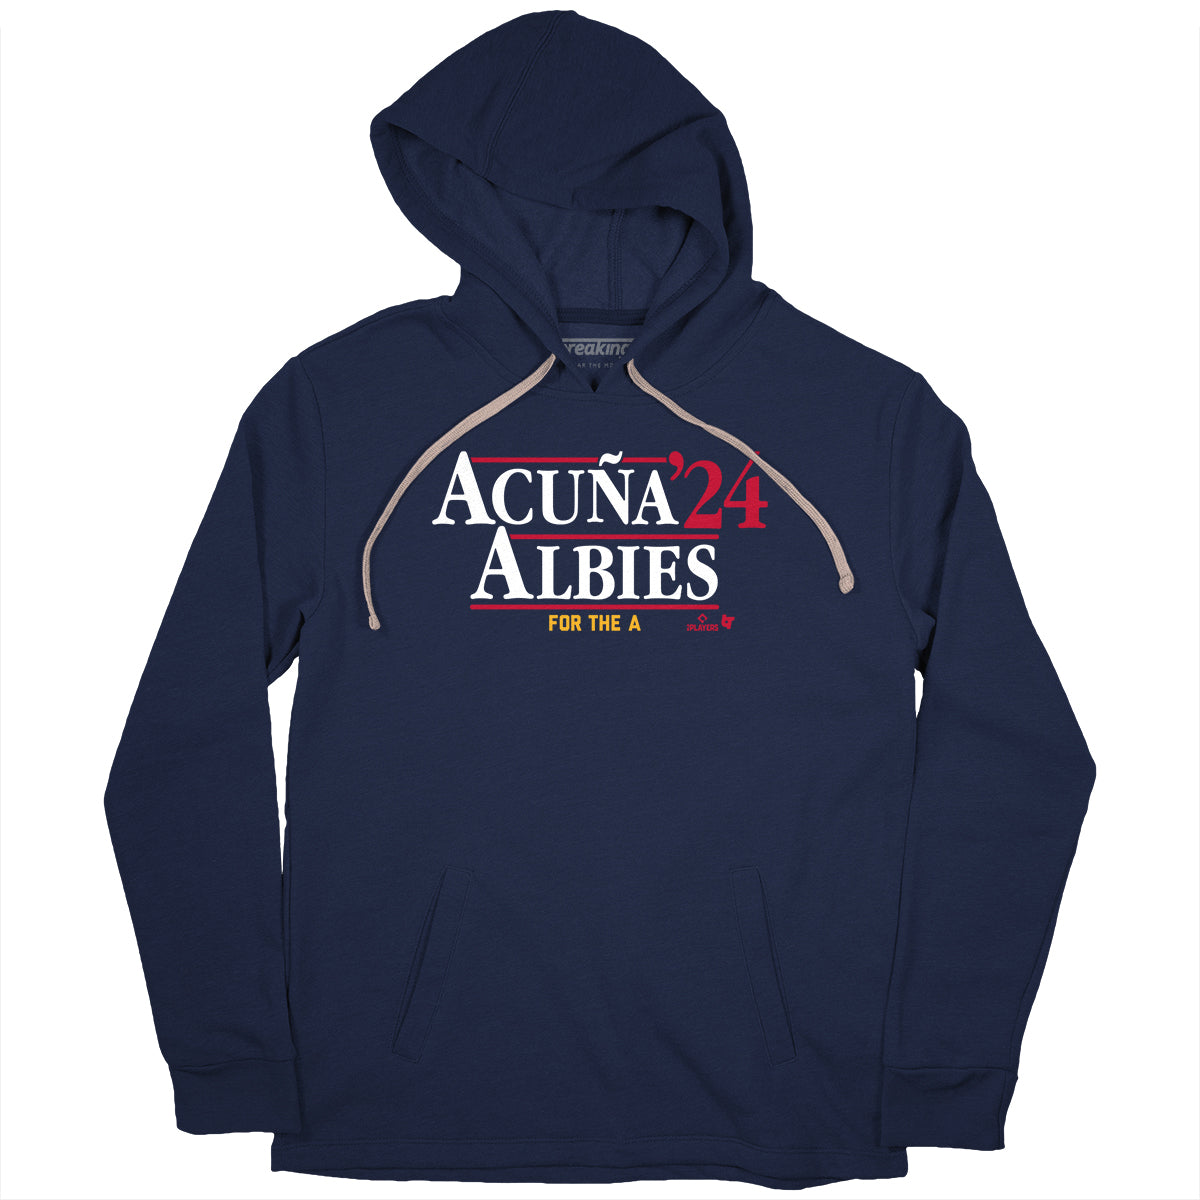 BreakingT Atlanta Braves Ronald Acuña Jr. and Ozzie Albies White Graphic  T-Shirt